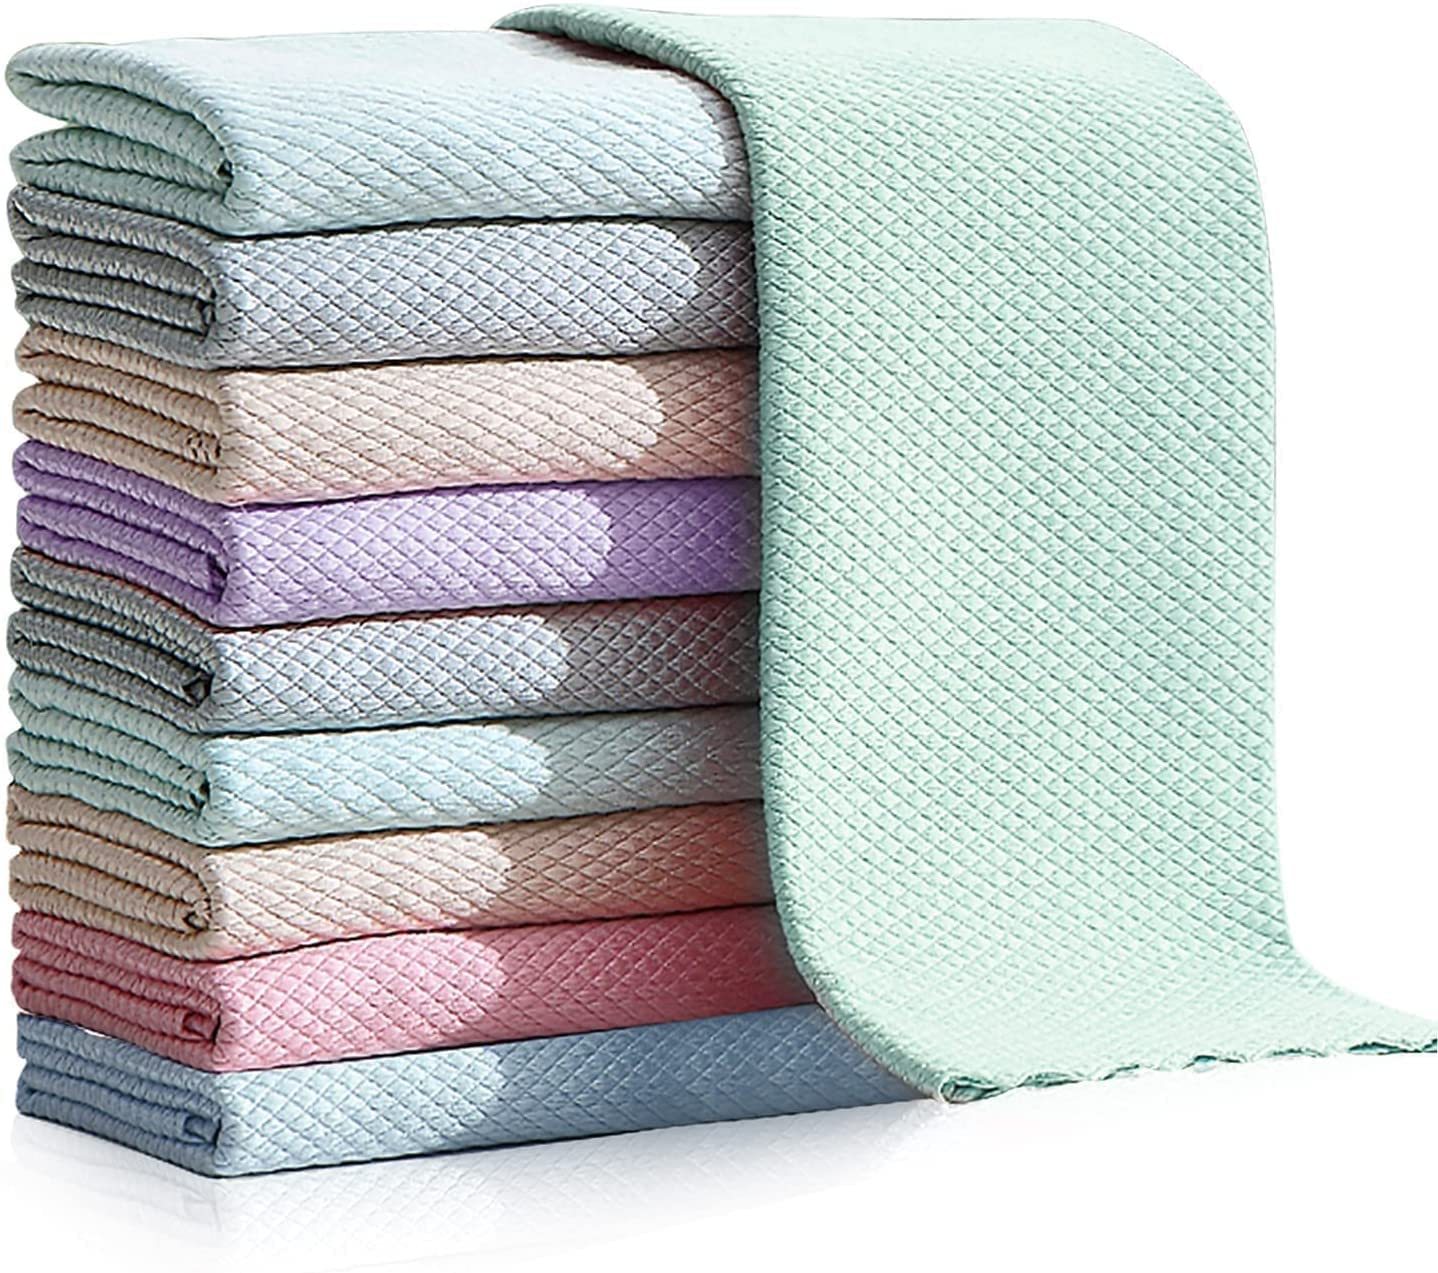 25 x 25CM Microfiber Cleaning Cloths (30 Pack) - Reusable Towels, Wash Rags,  Dust Cloth, All-Purpose: Kitchen, Dish, Cars, Shop, Glass - Green 